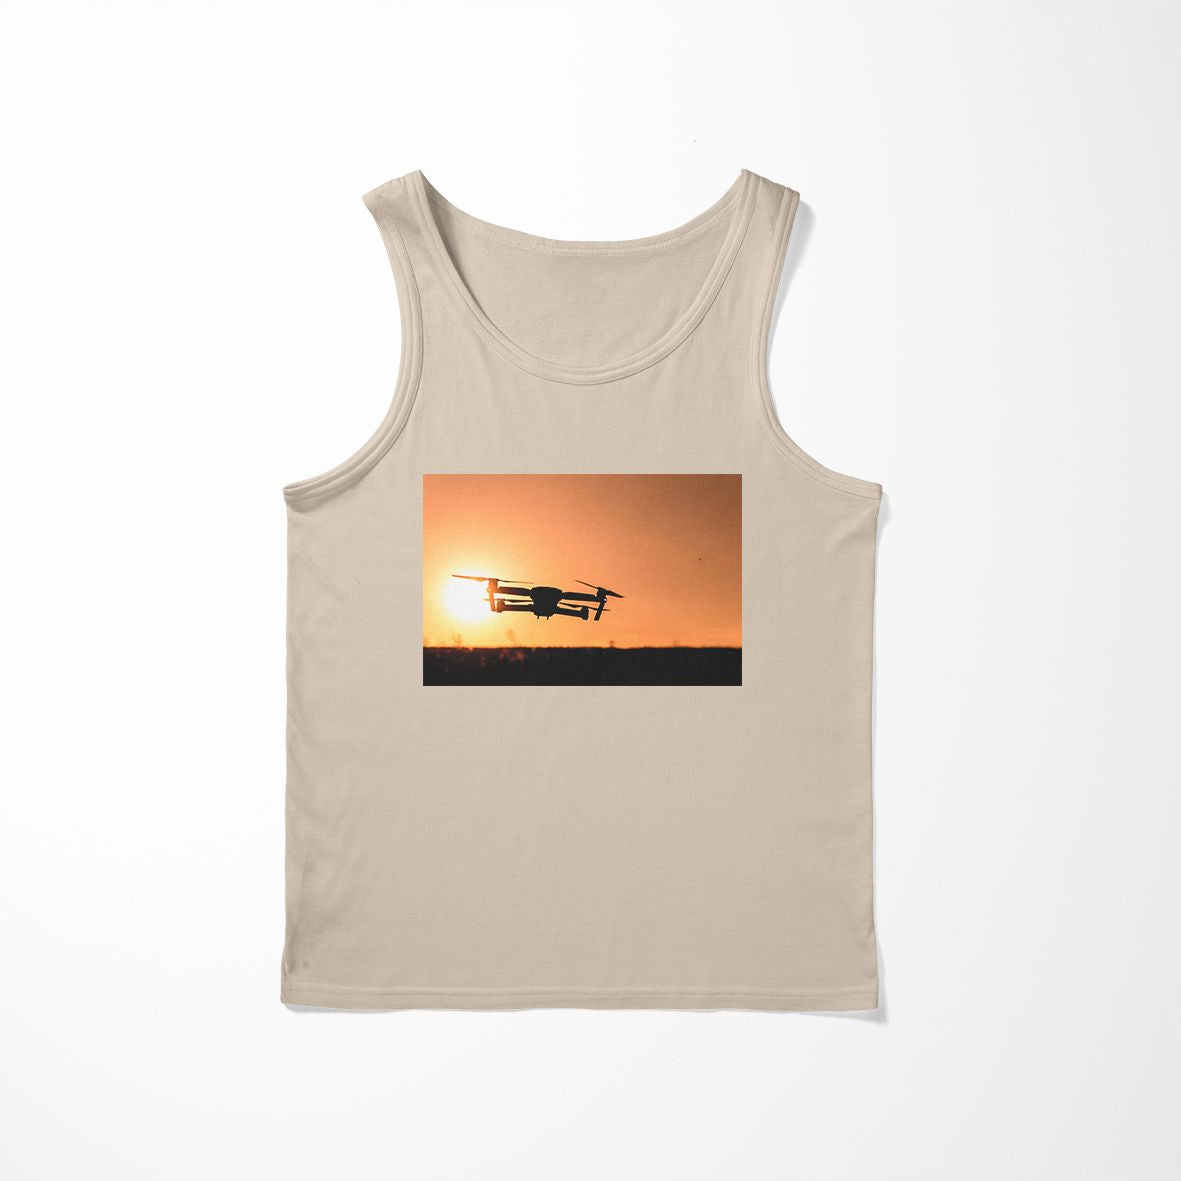 Amazing Drone in Sunset Designed Tank Tops